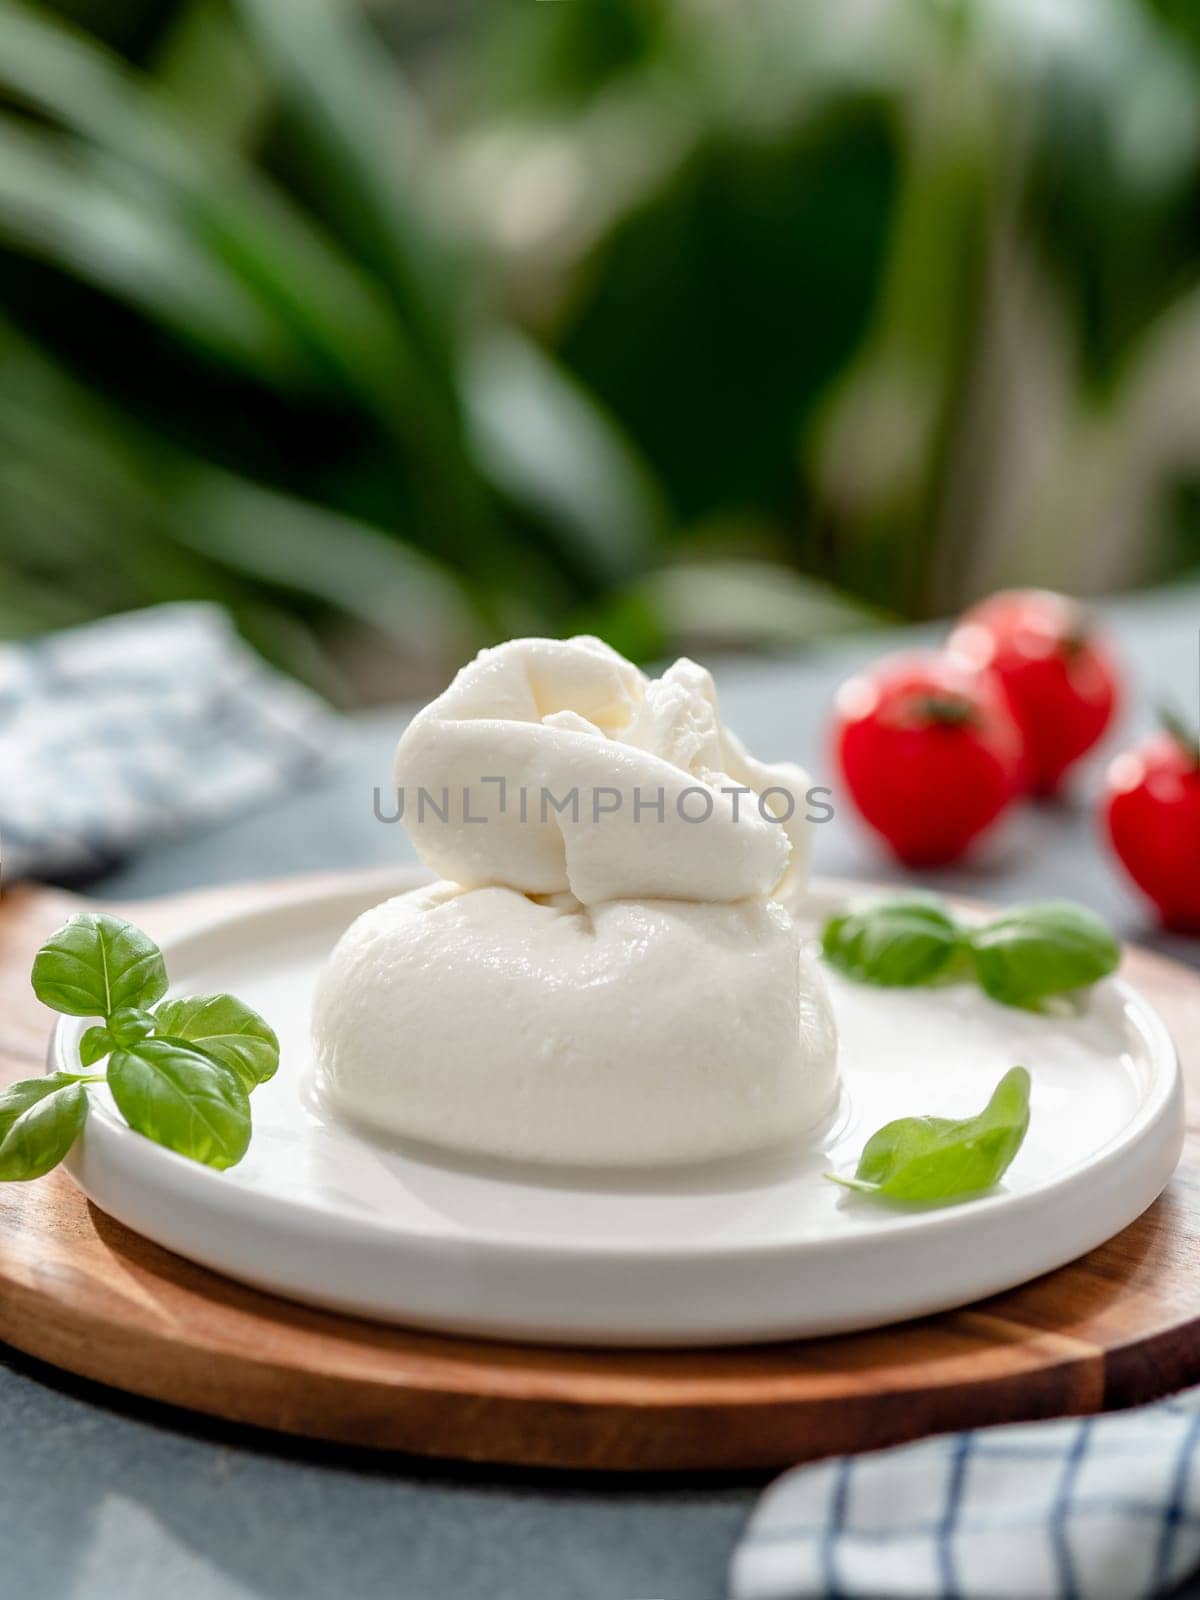 Fresh Italian cheese on white circle plate. White ball of burrata or burratina cheese, decorated basil and tomatoes. Soft white burrata cheese ball on blurred green background. Vertical. Copy space